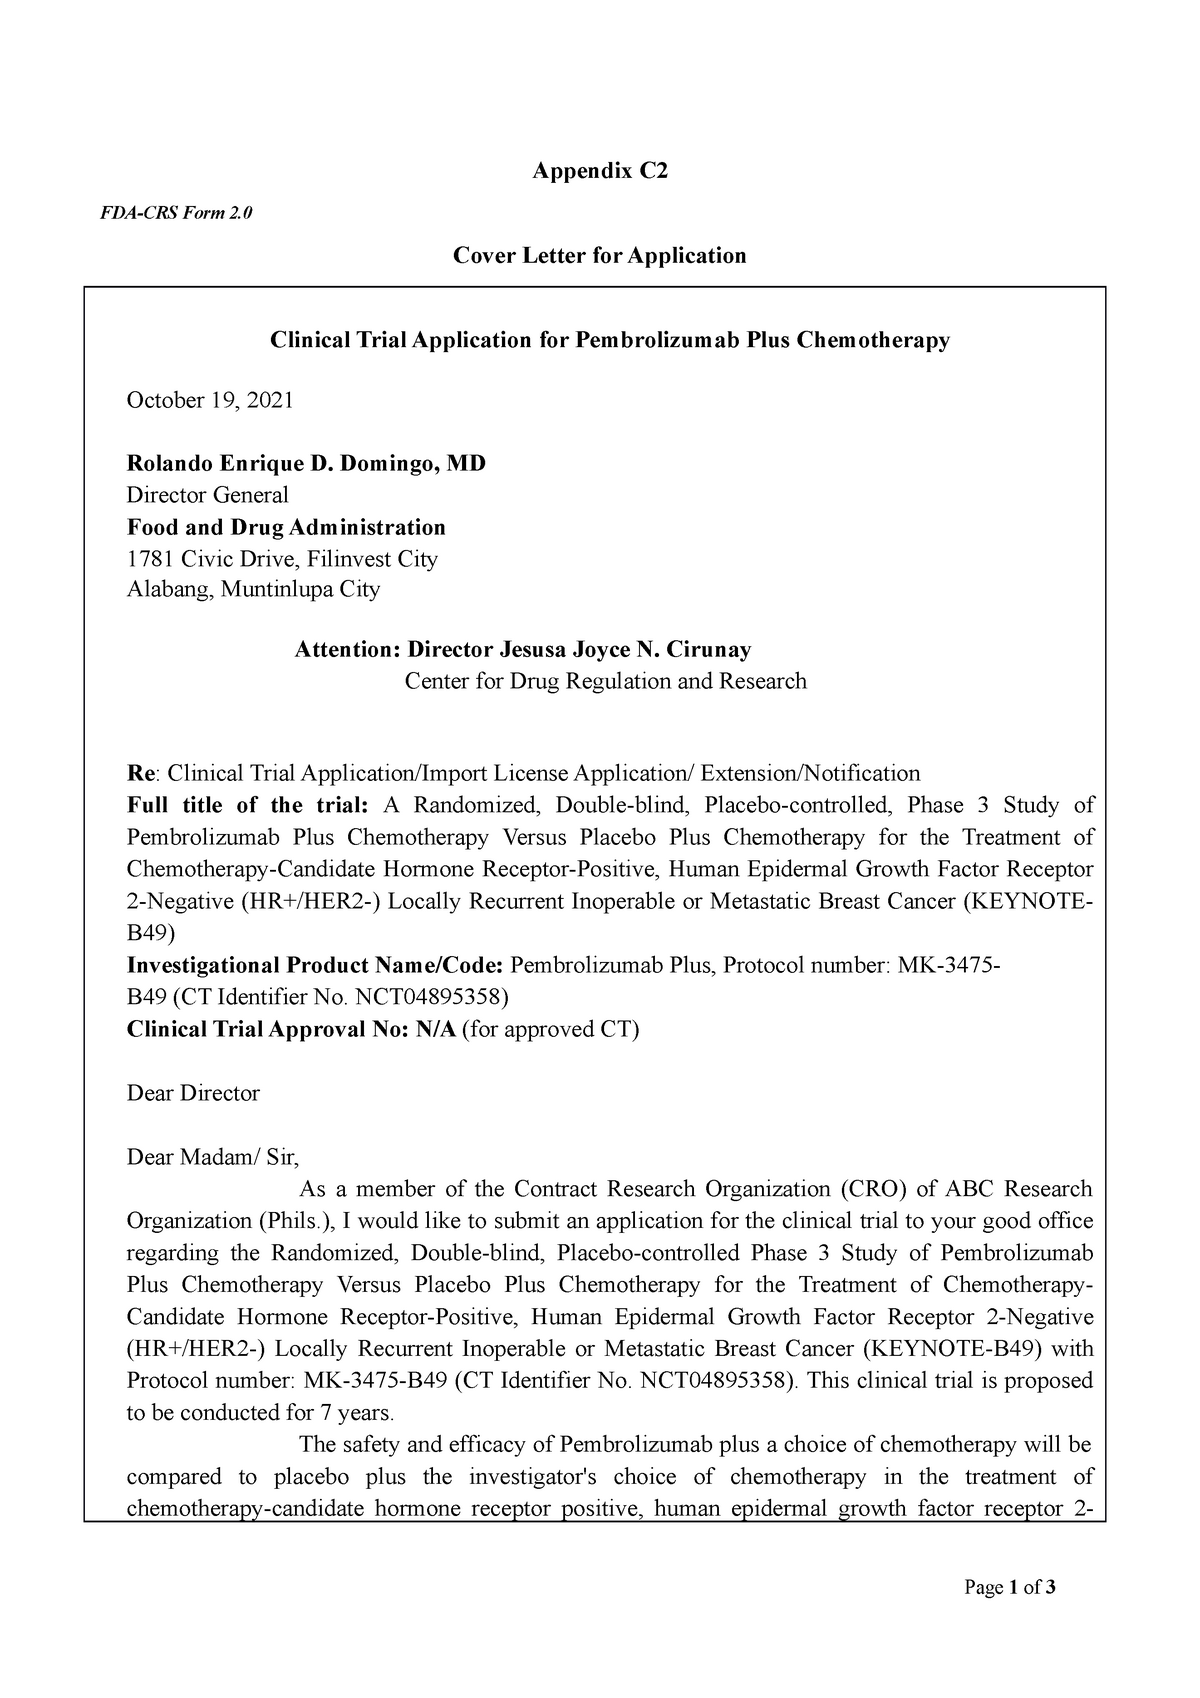 clinical trial application cover letter (appendix c2)